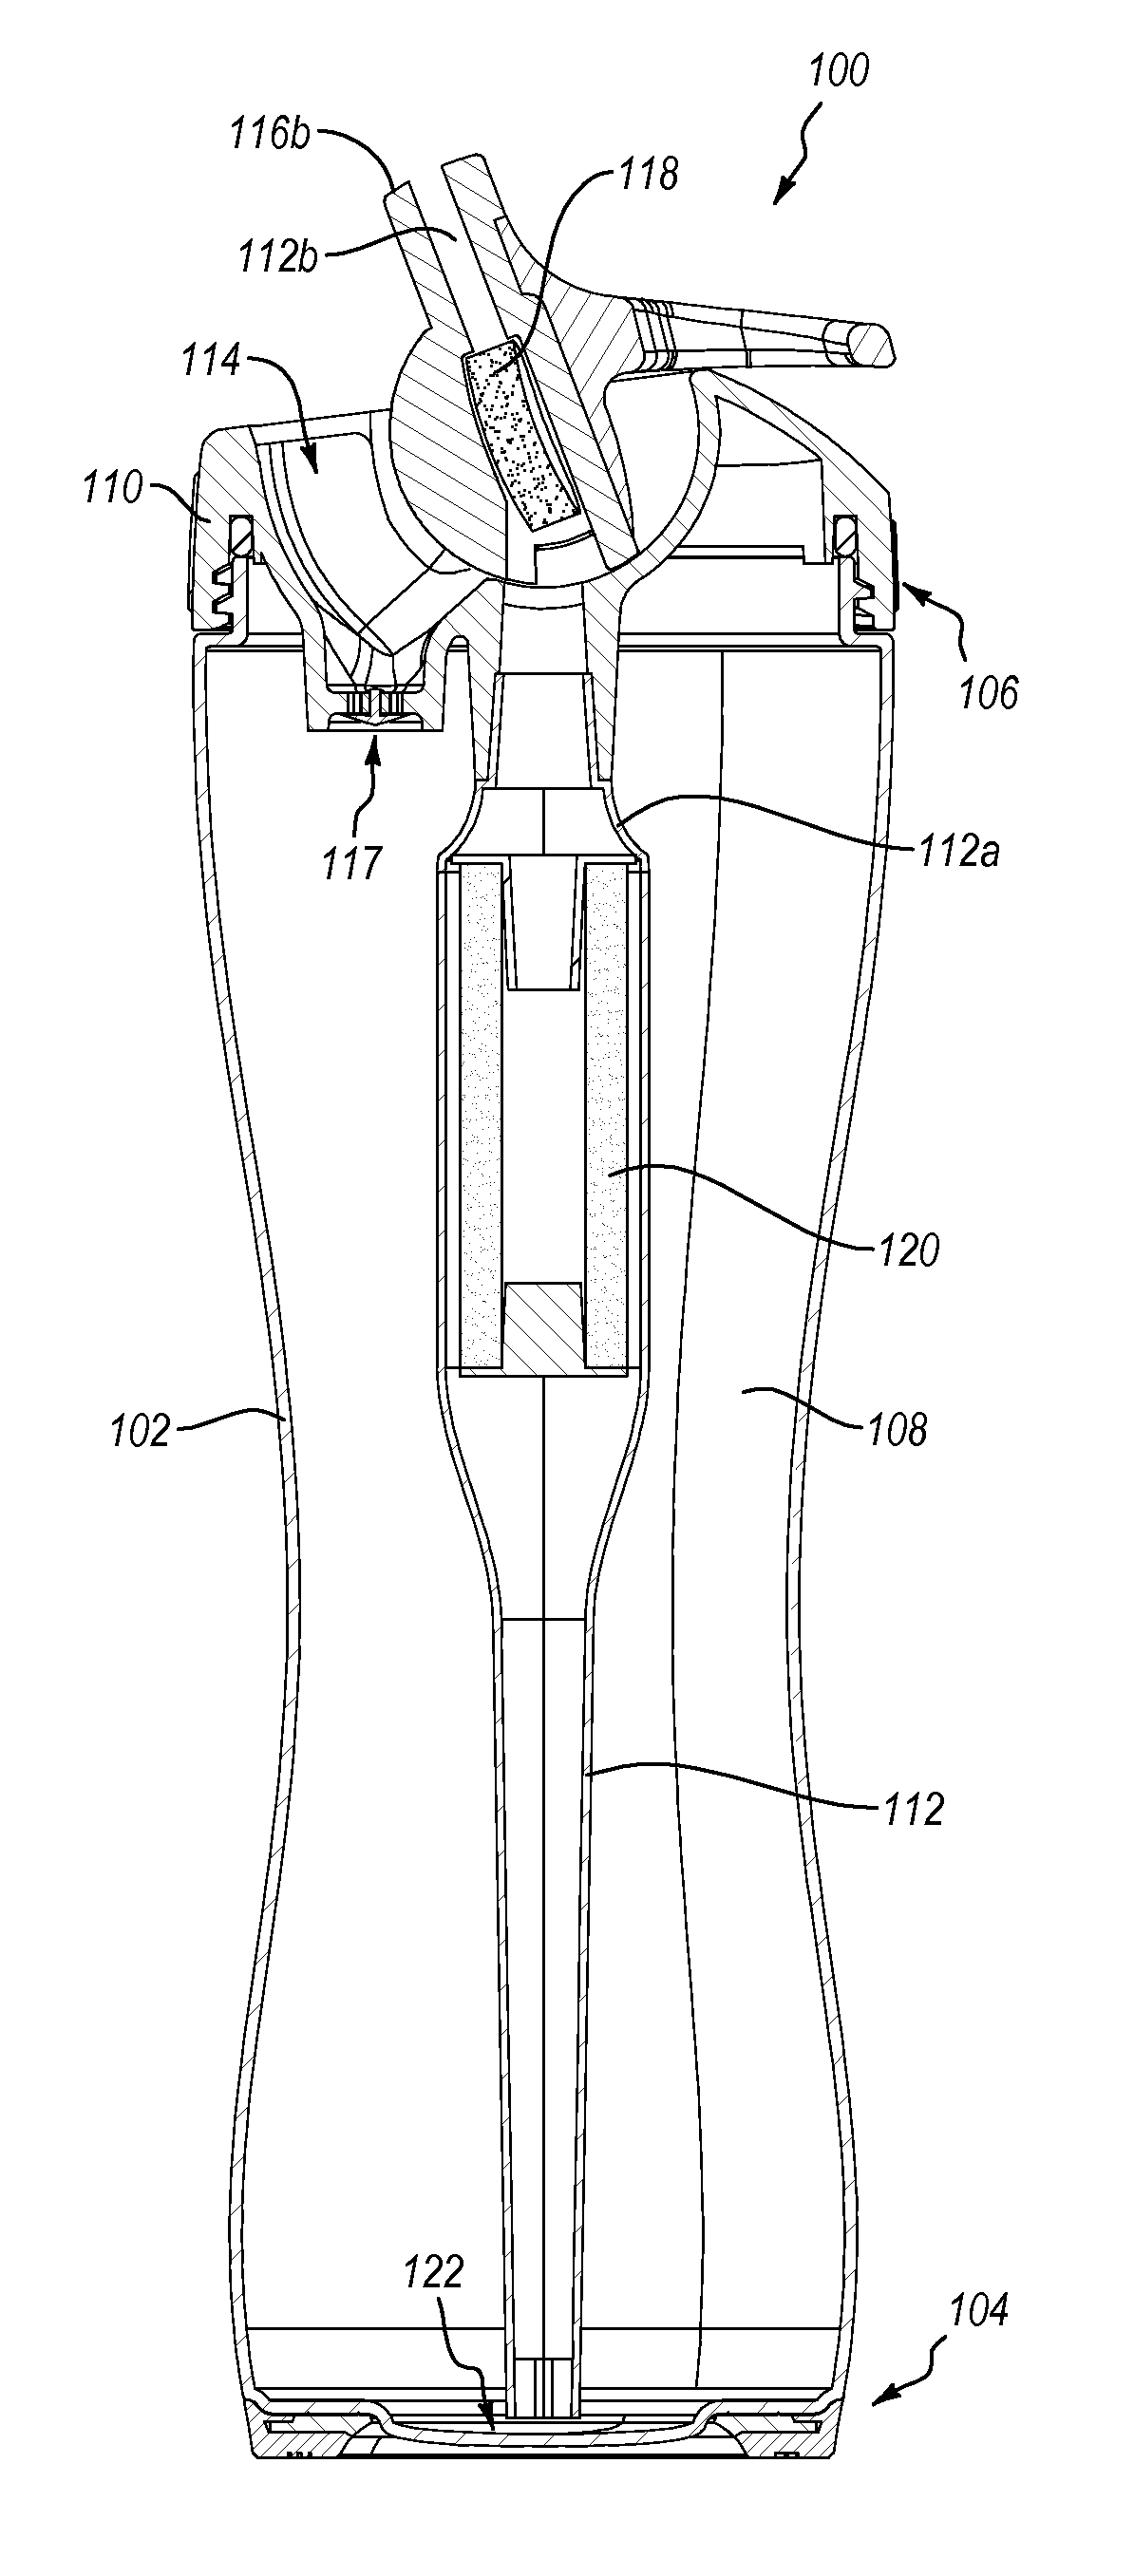 Water bottle with straw having integrated filter and downstream flavor tablet